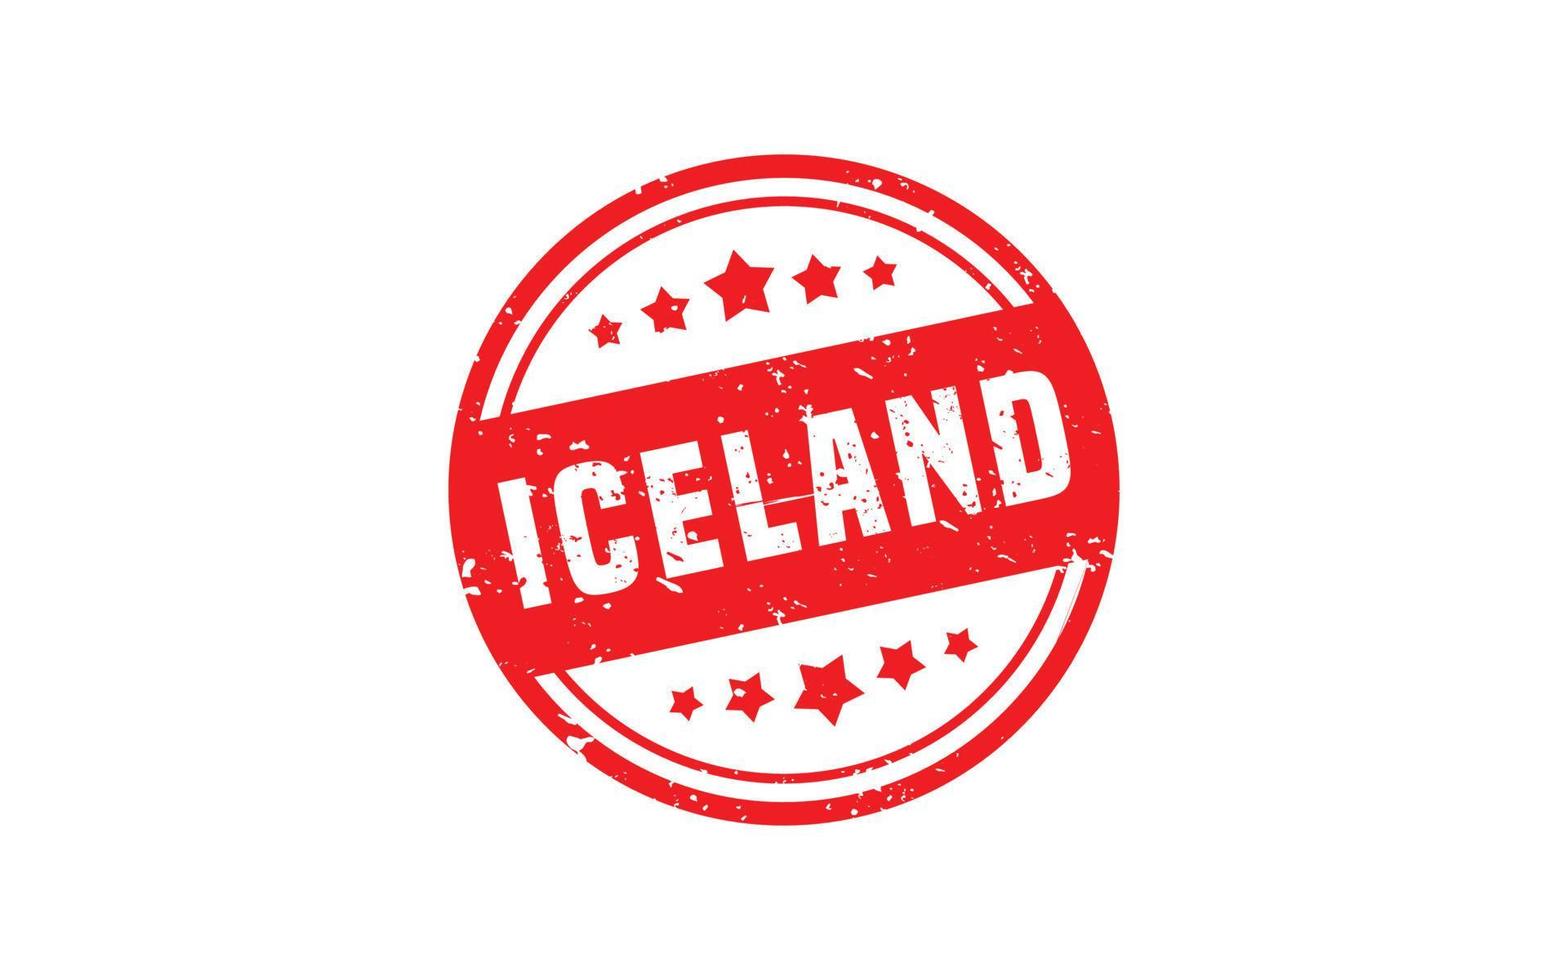 ICELAND stamp rubber with grunge style on white background vector